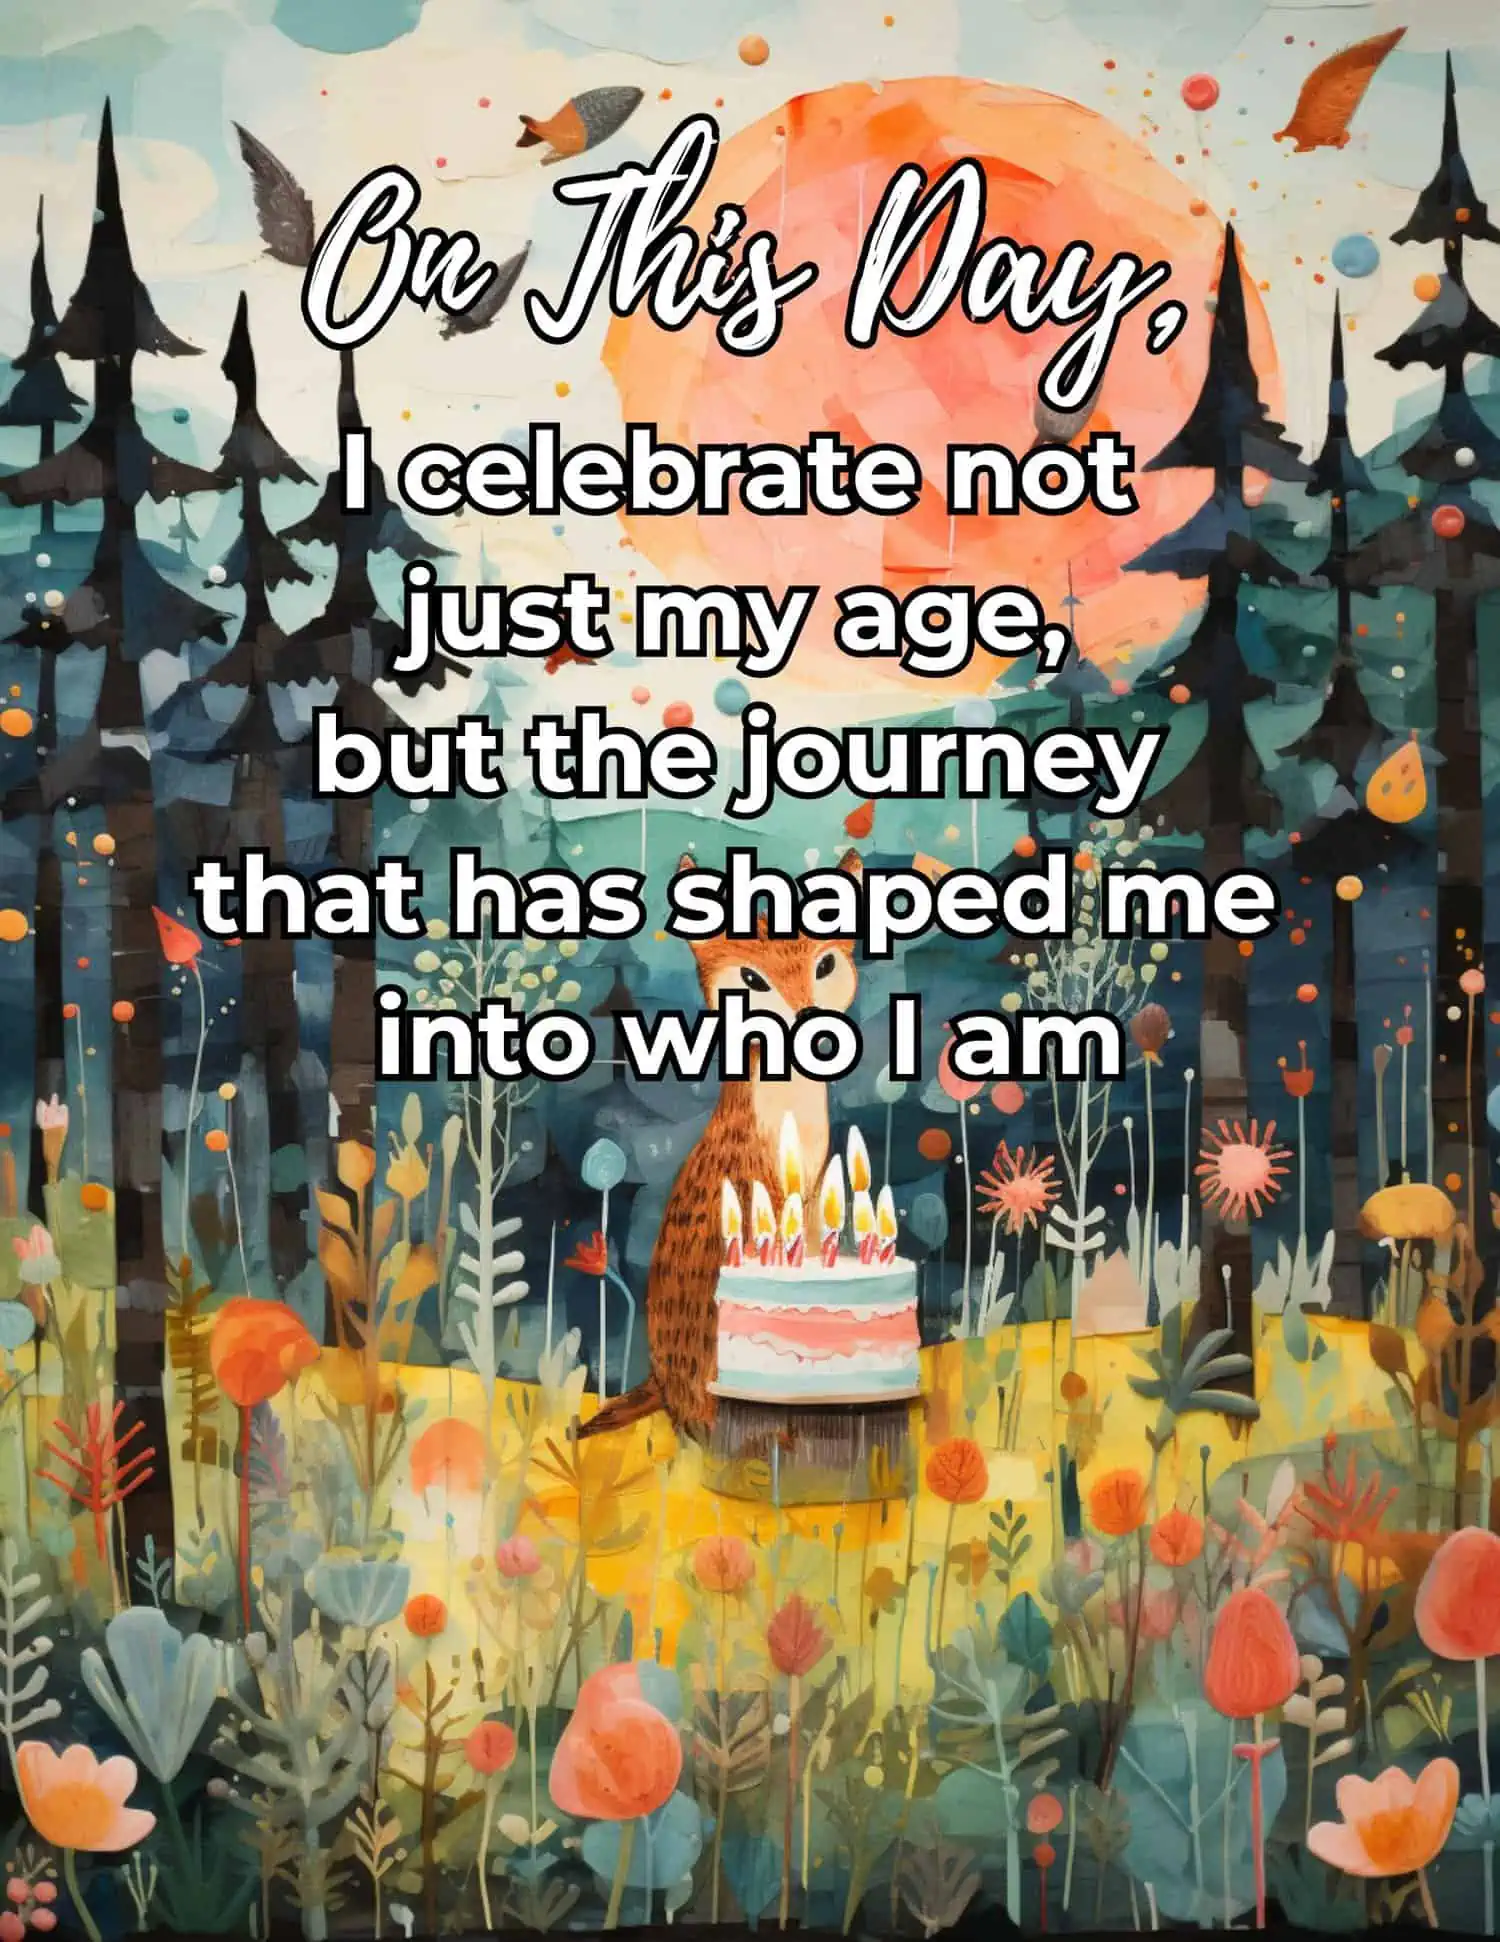 A collection of heartfelt and emotional birthday wishes, perfect for a deeply personal and introspective birthday reflection.